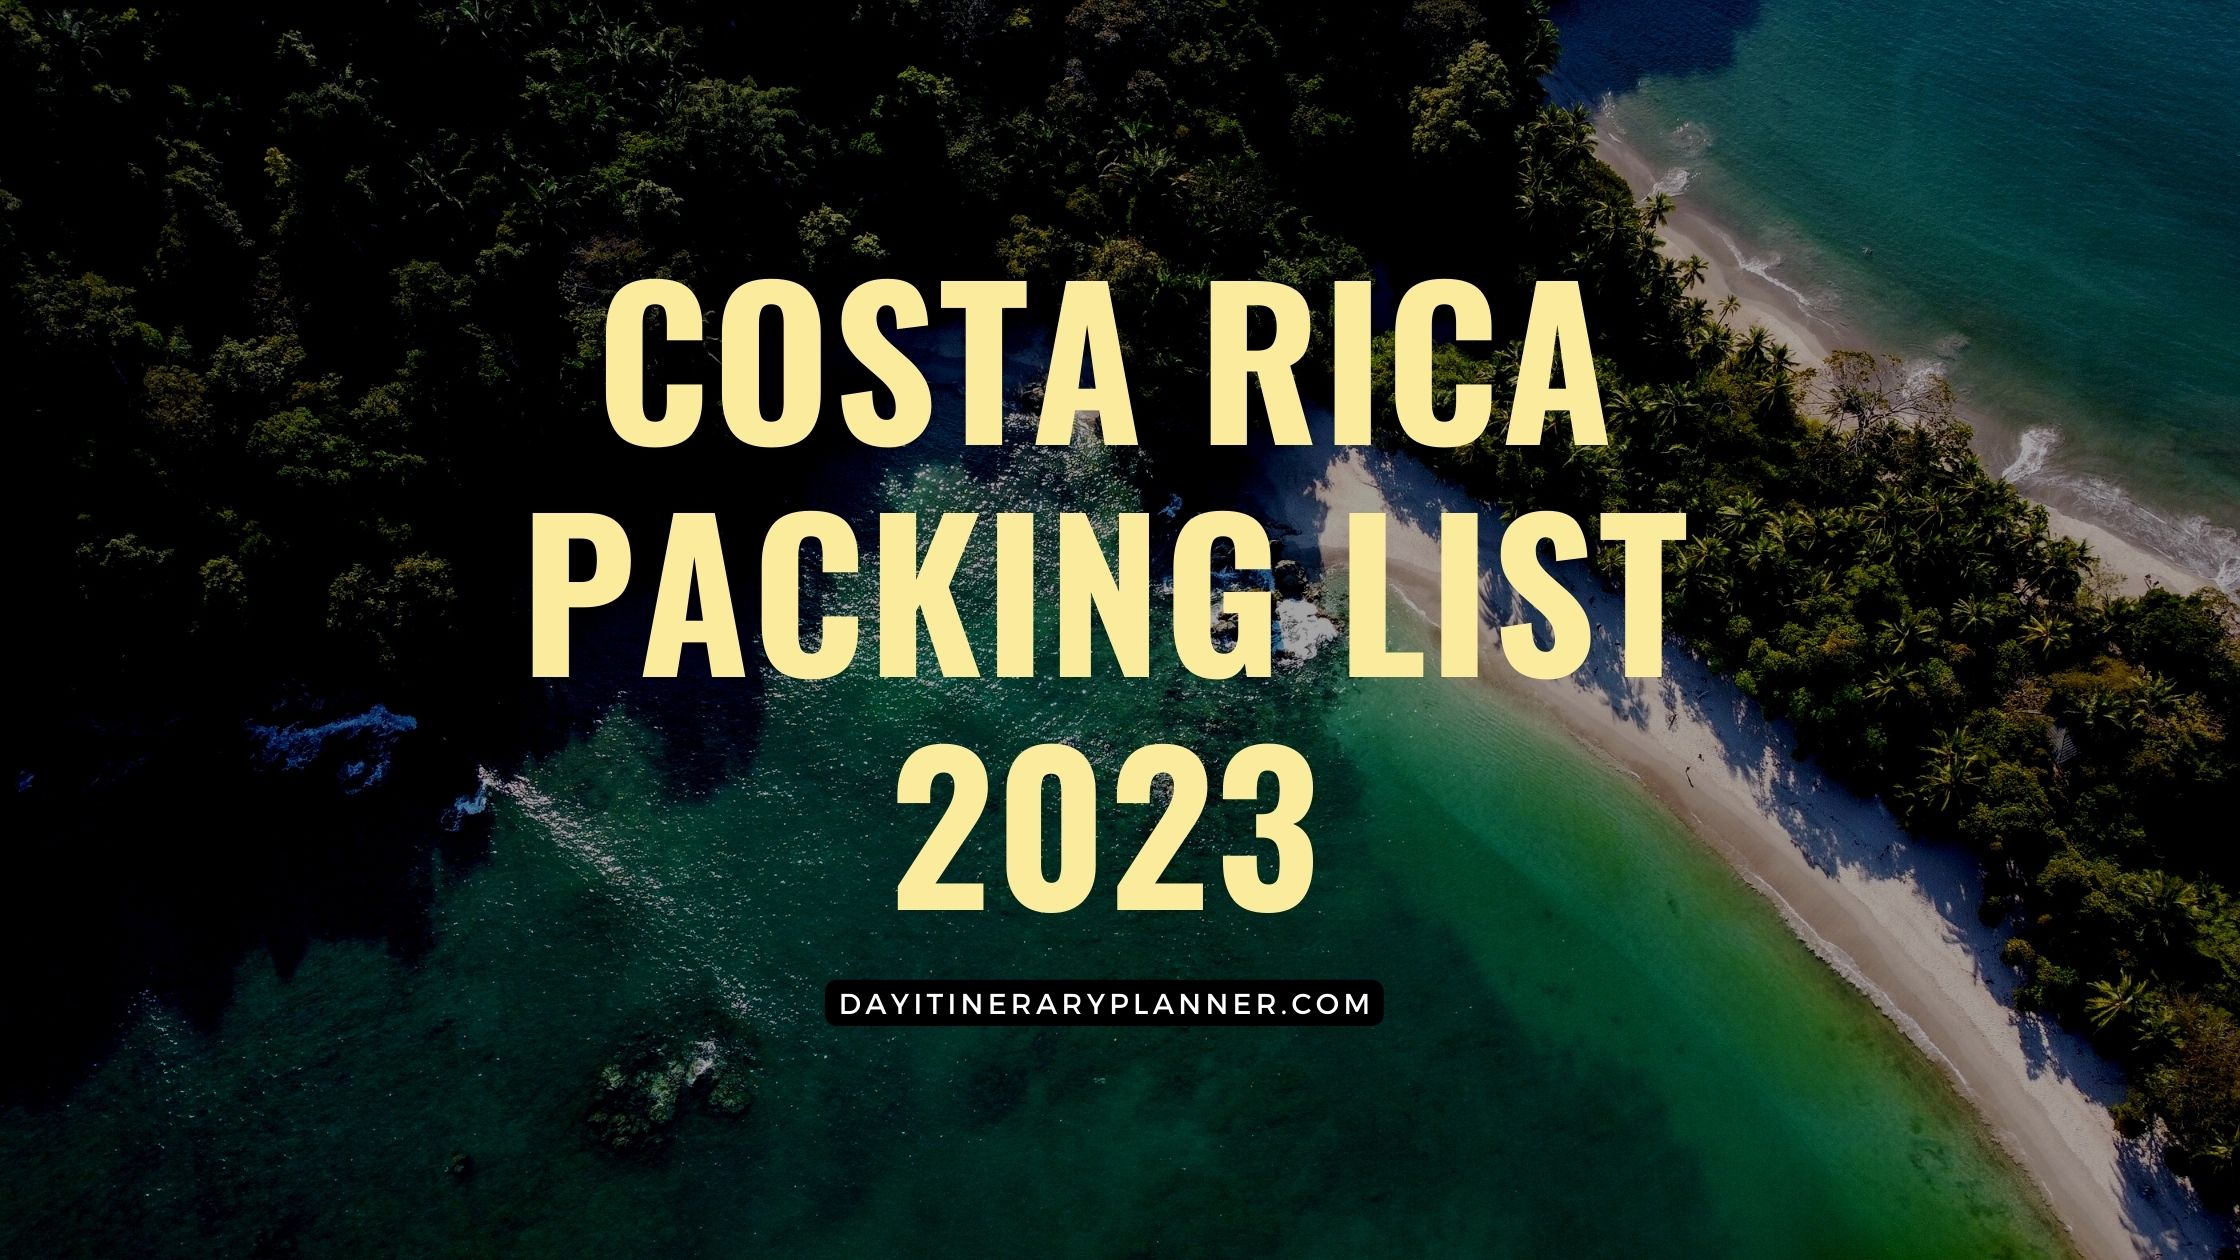 Costa Rica Packing List 2023